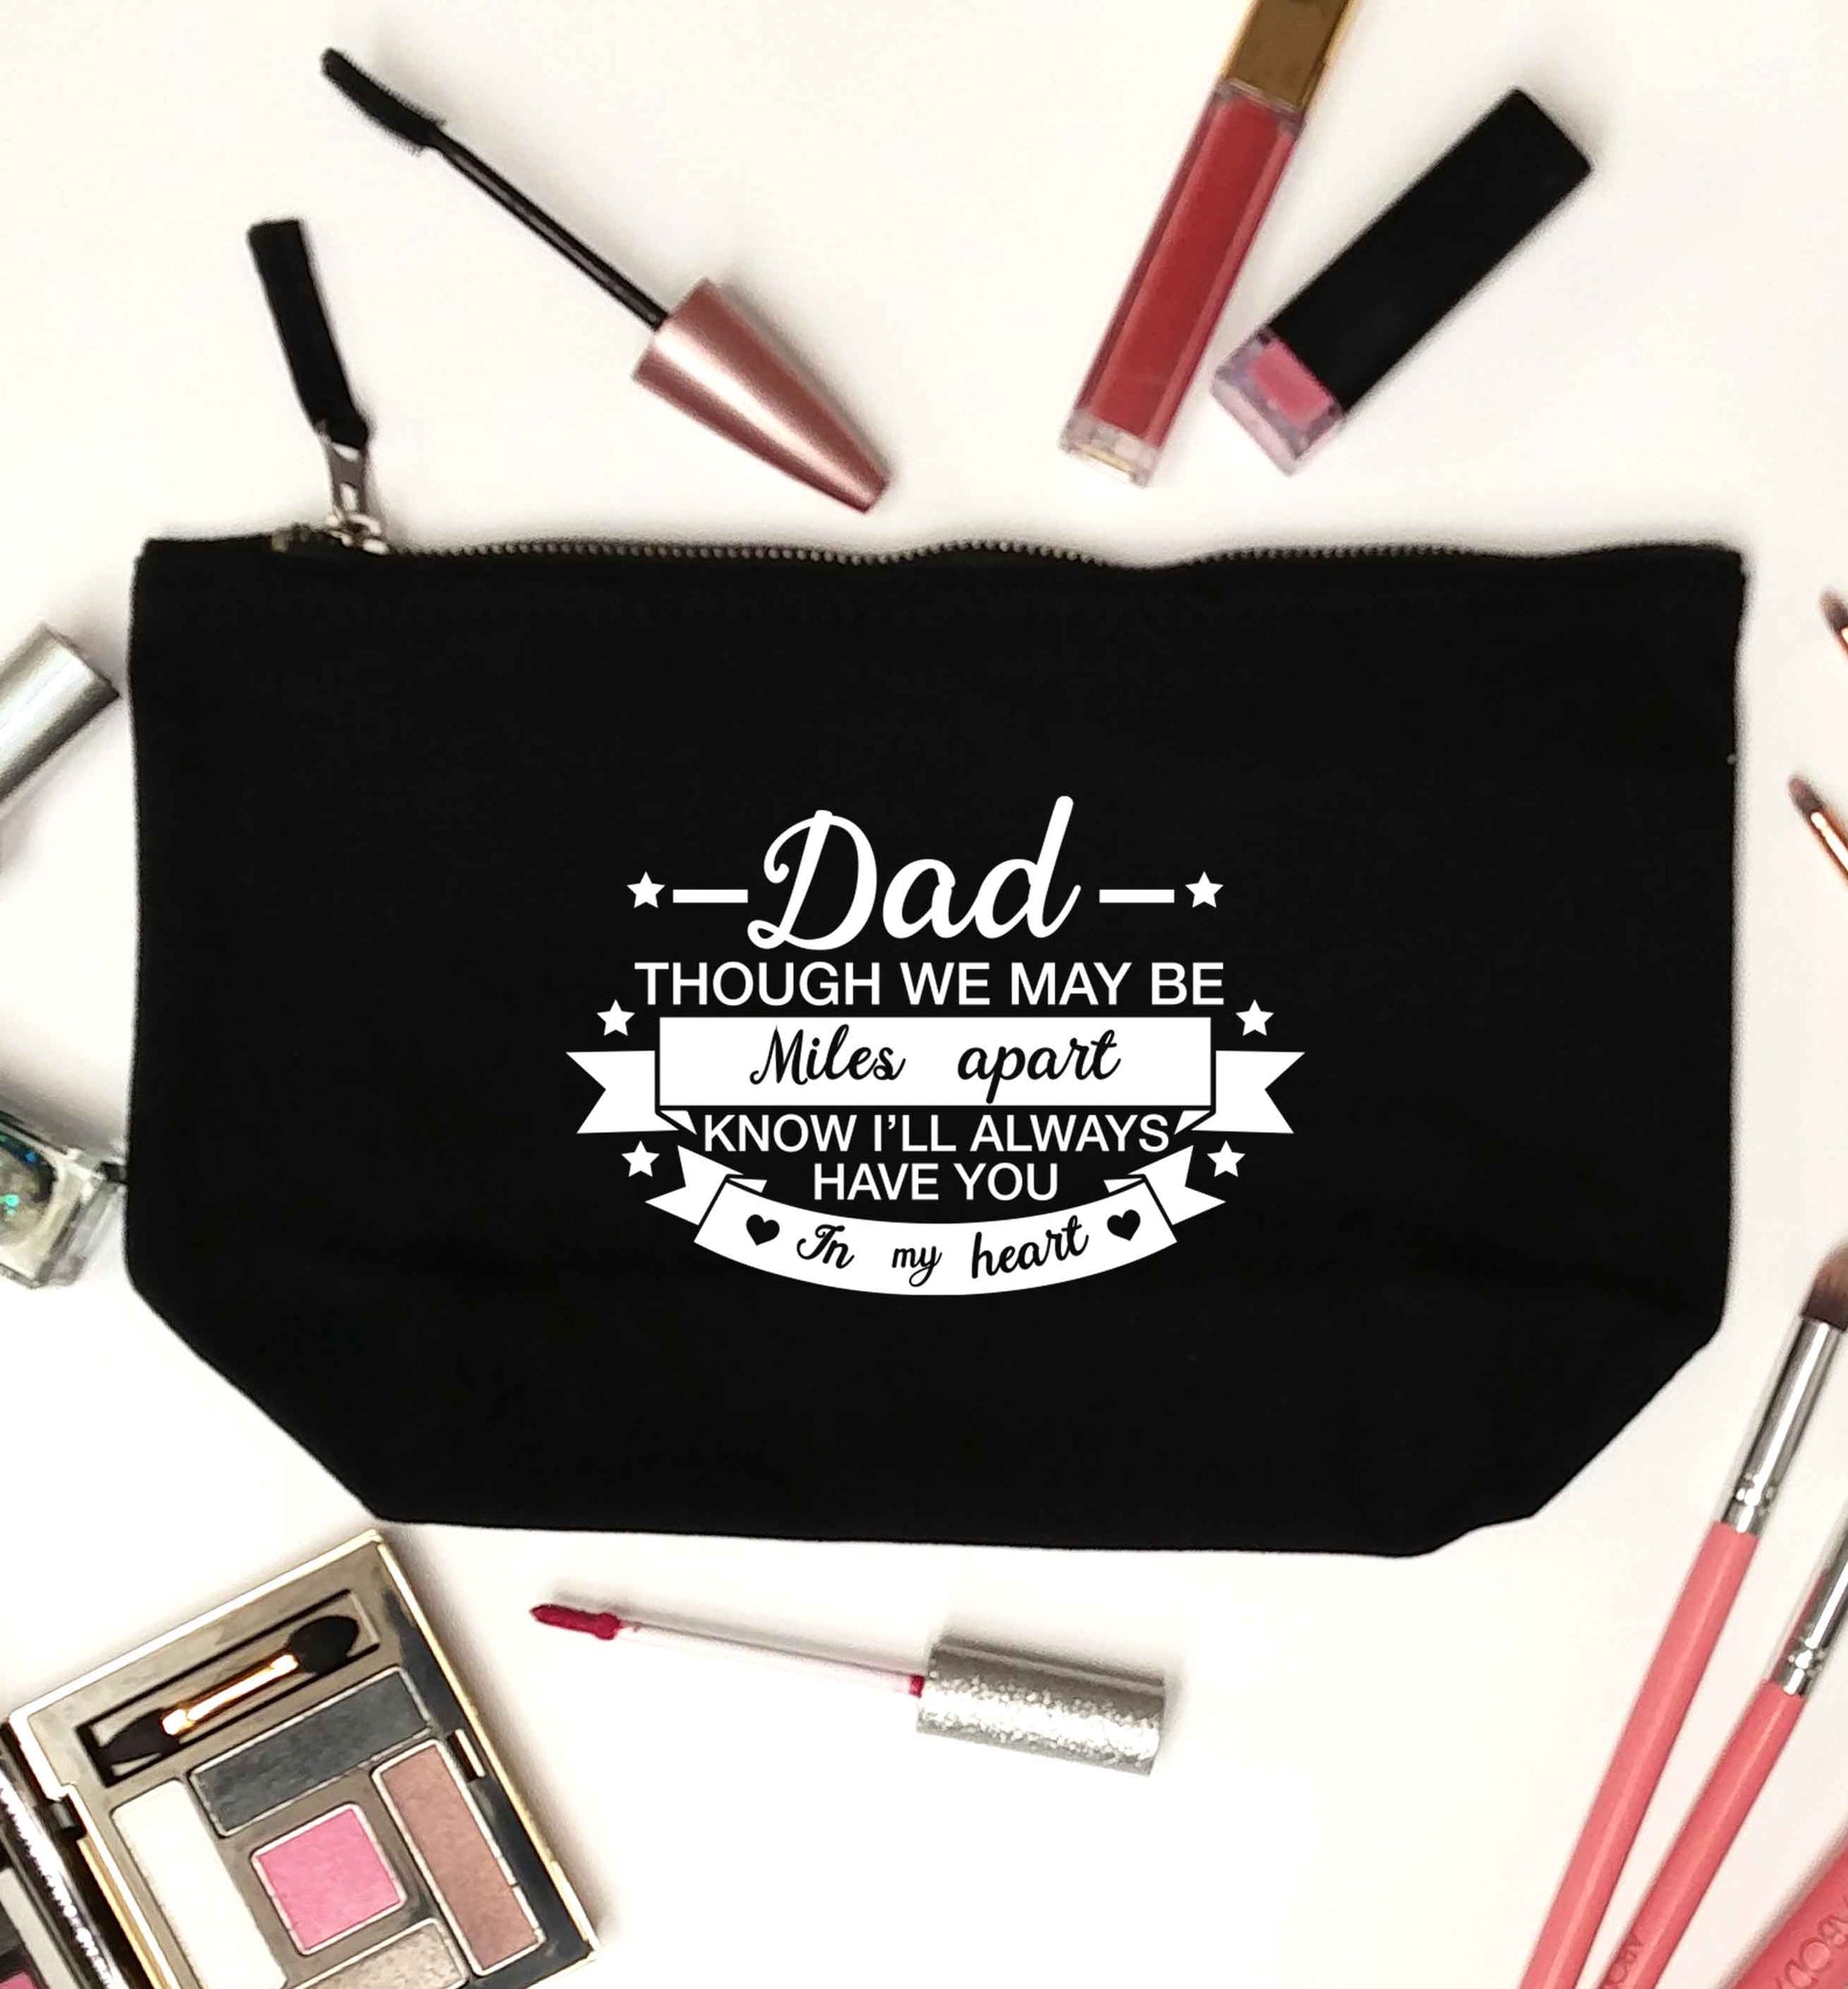 Dad though we are miles apart know I'll always have you in my heart black makeup bag